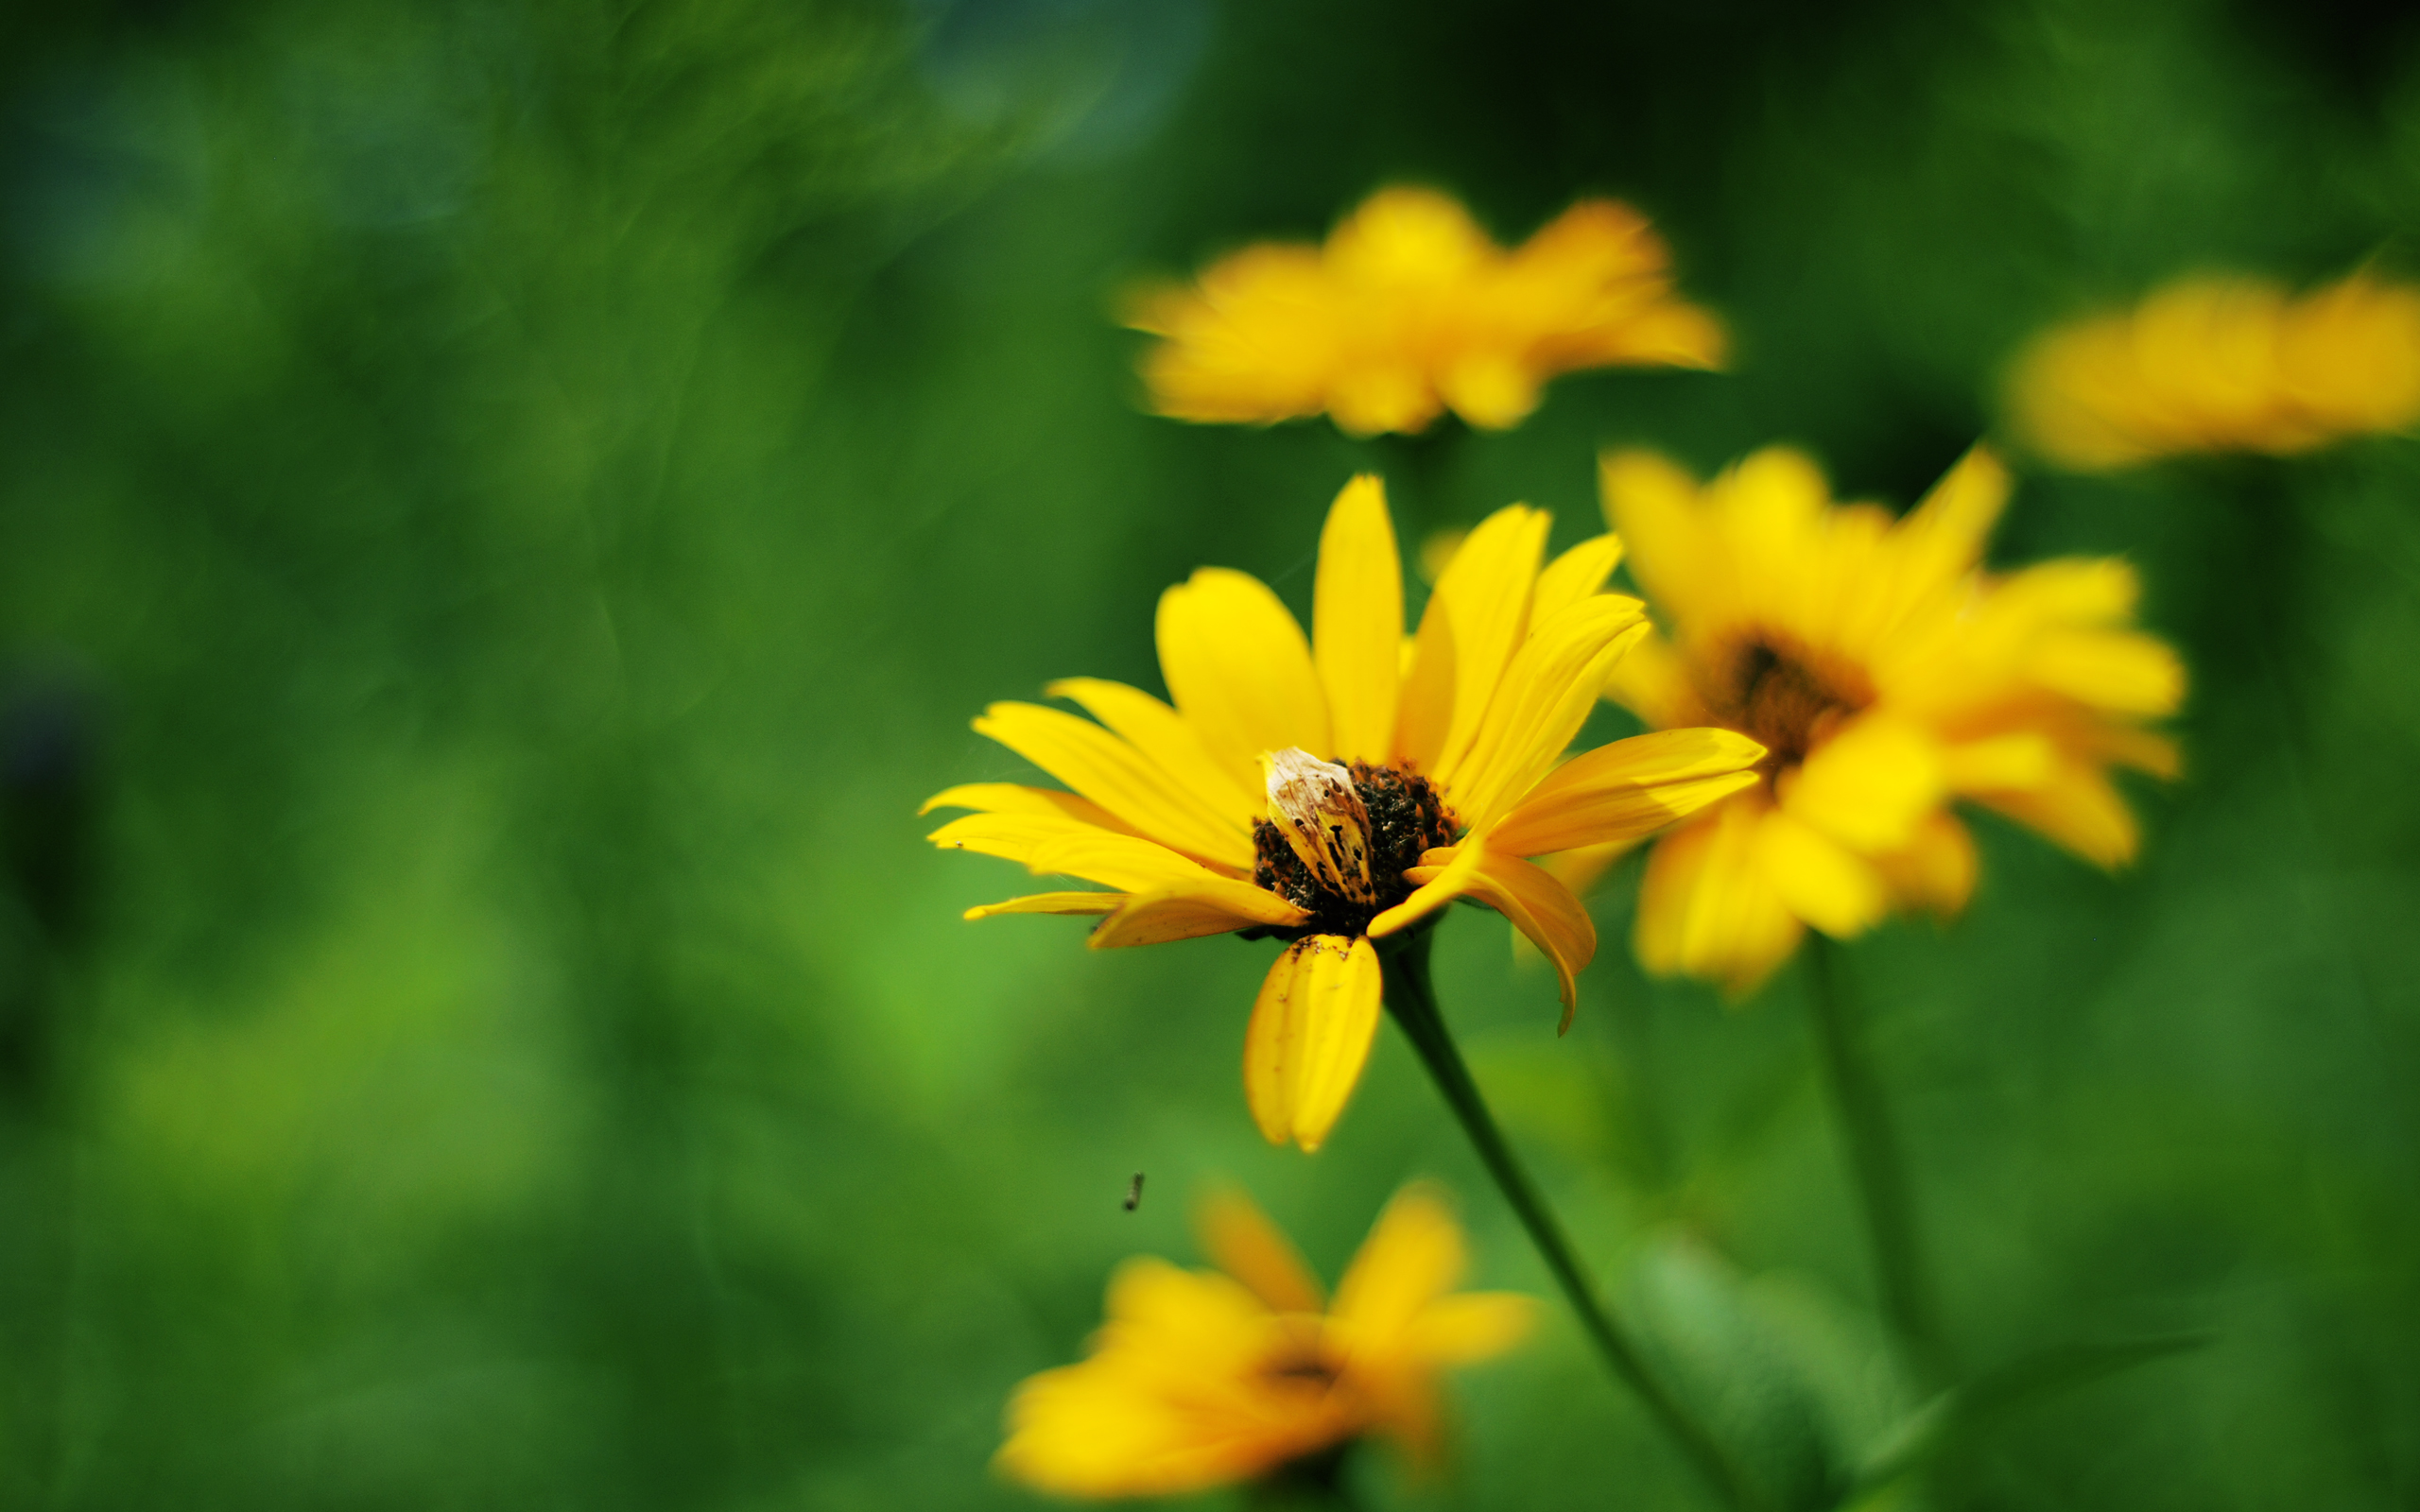 yellow summer flowers wallpapers hd wallpapers yellow summer flowers